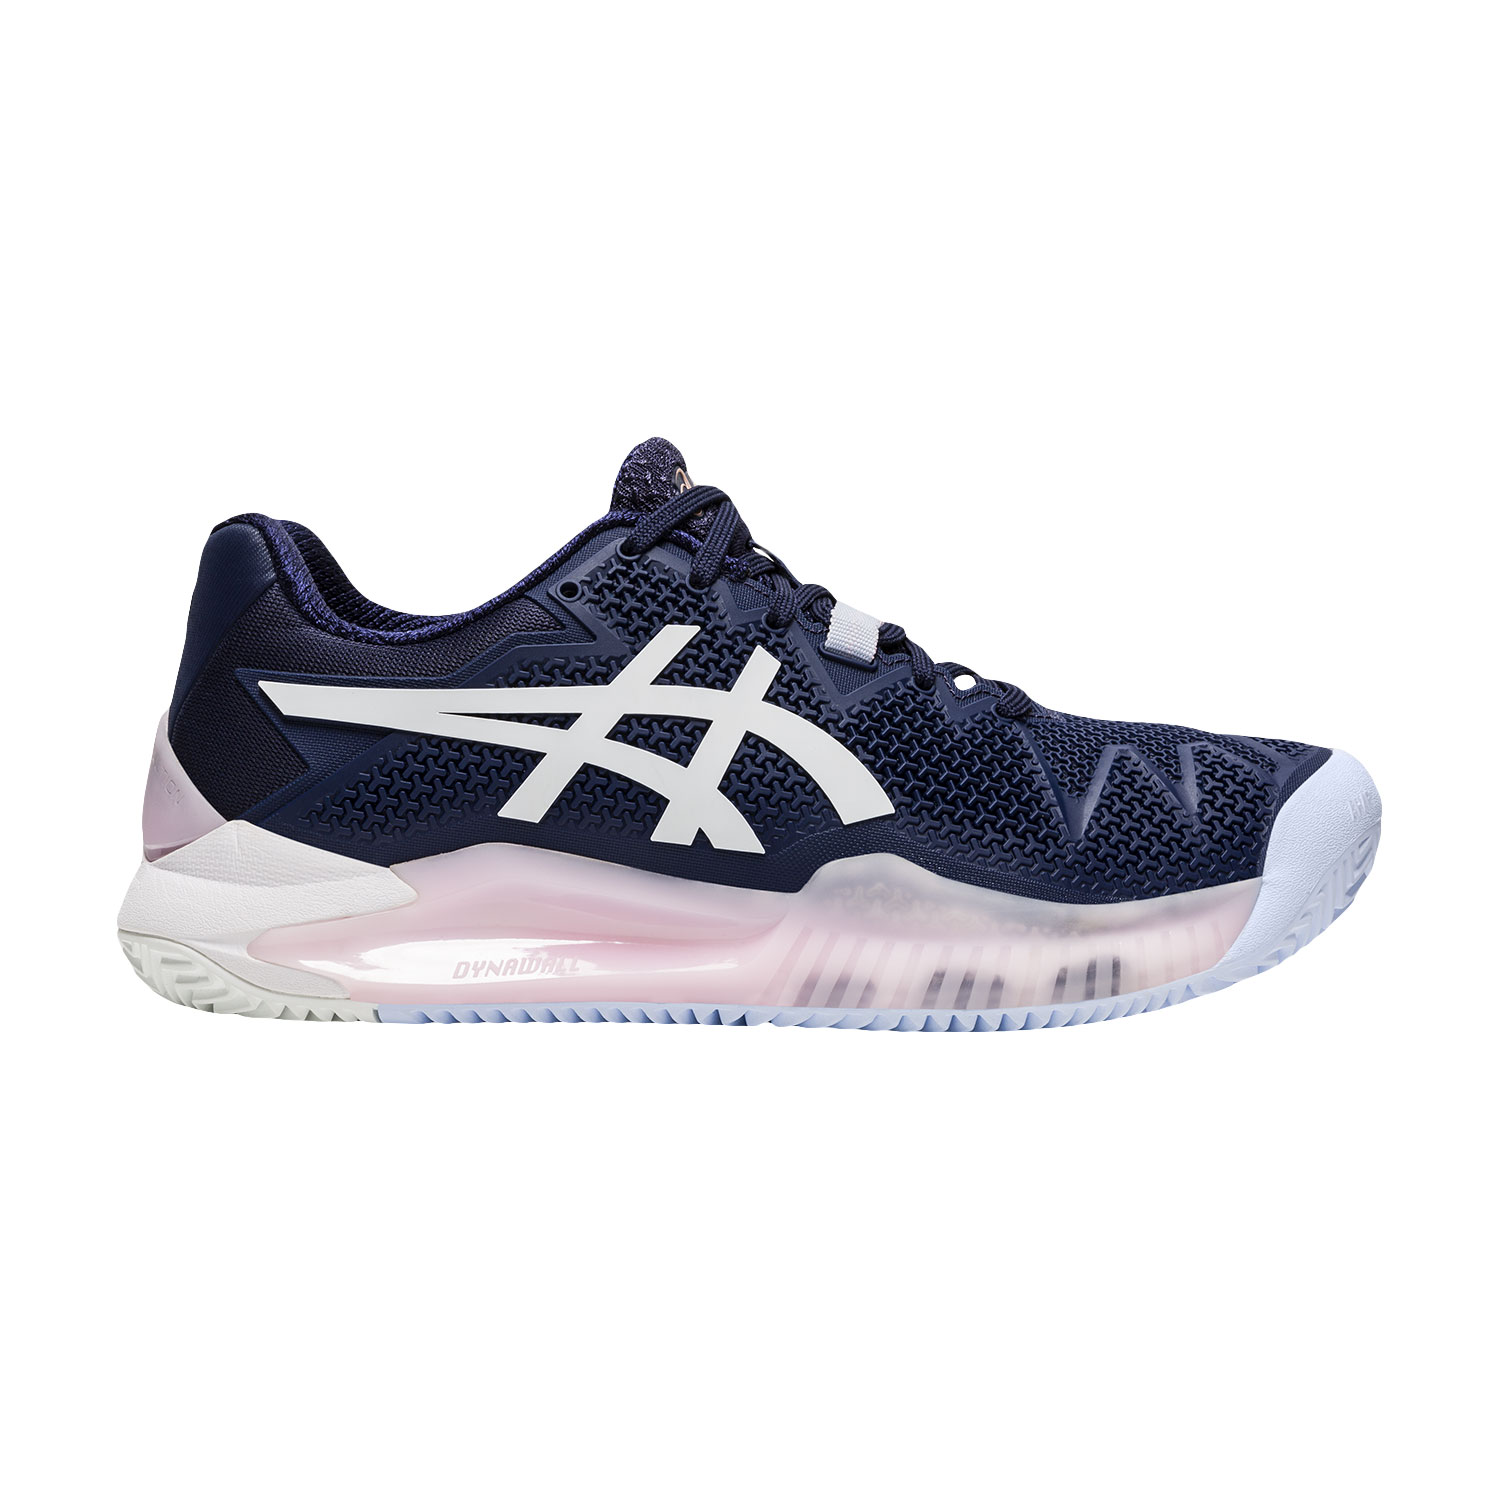 Asics Gel Resolution 8 Clay Women's Tennis Shoes - Peacoat